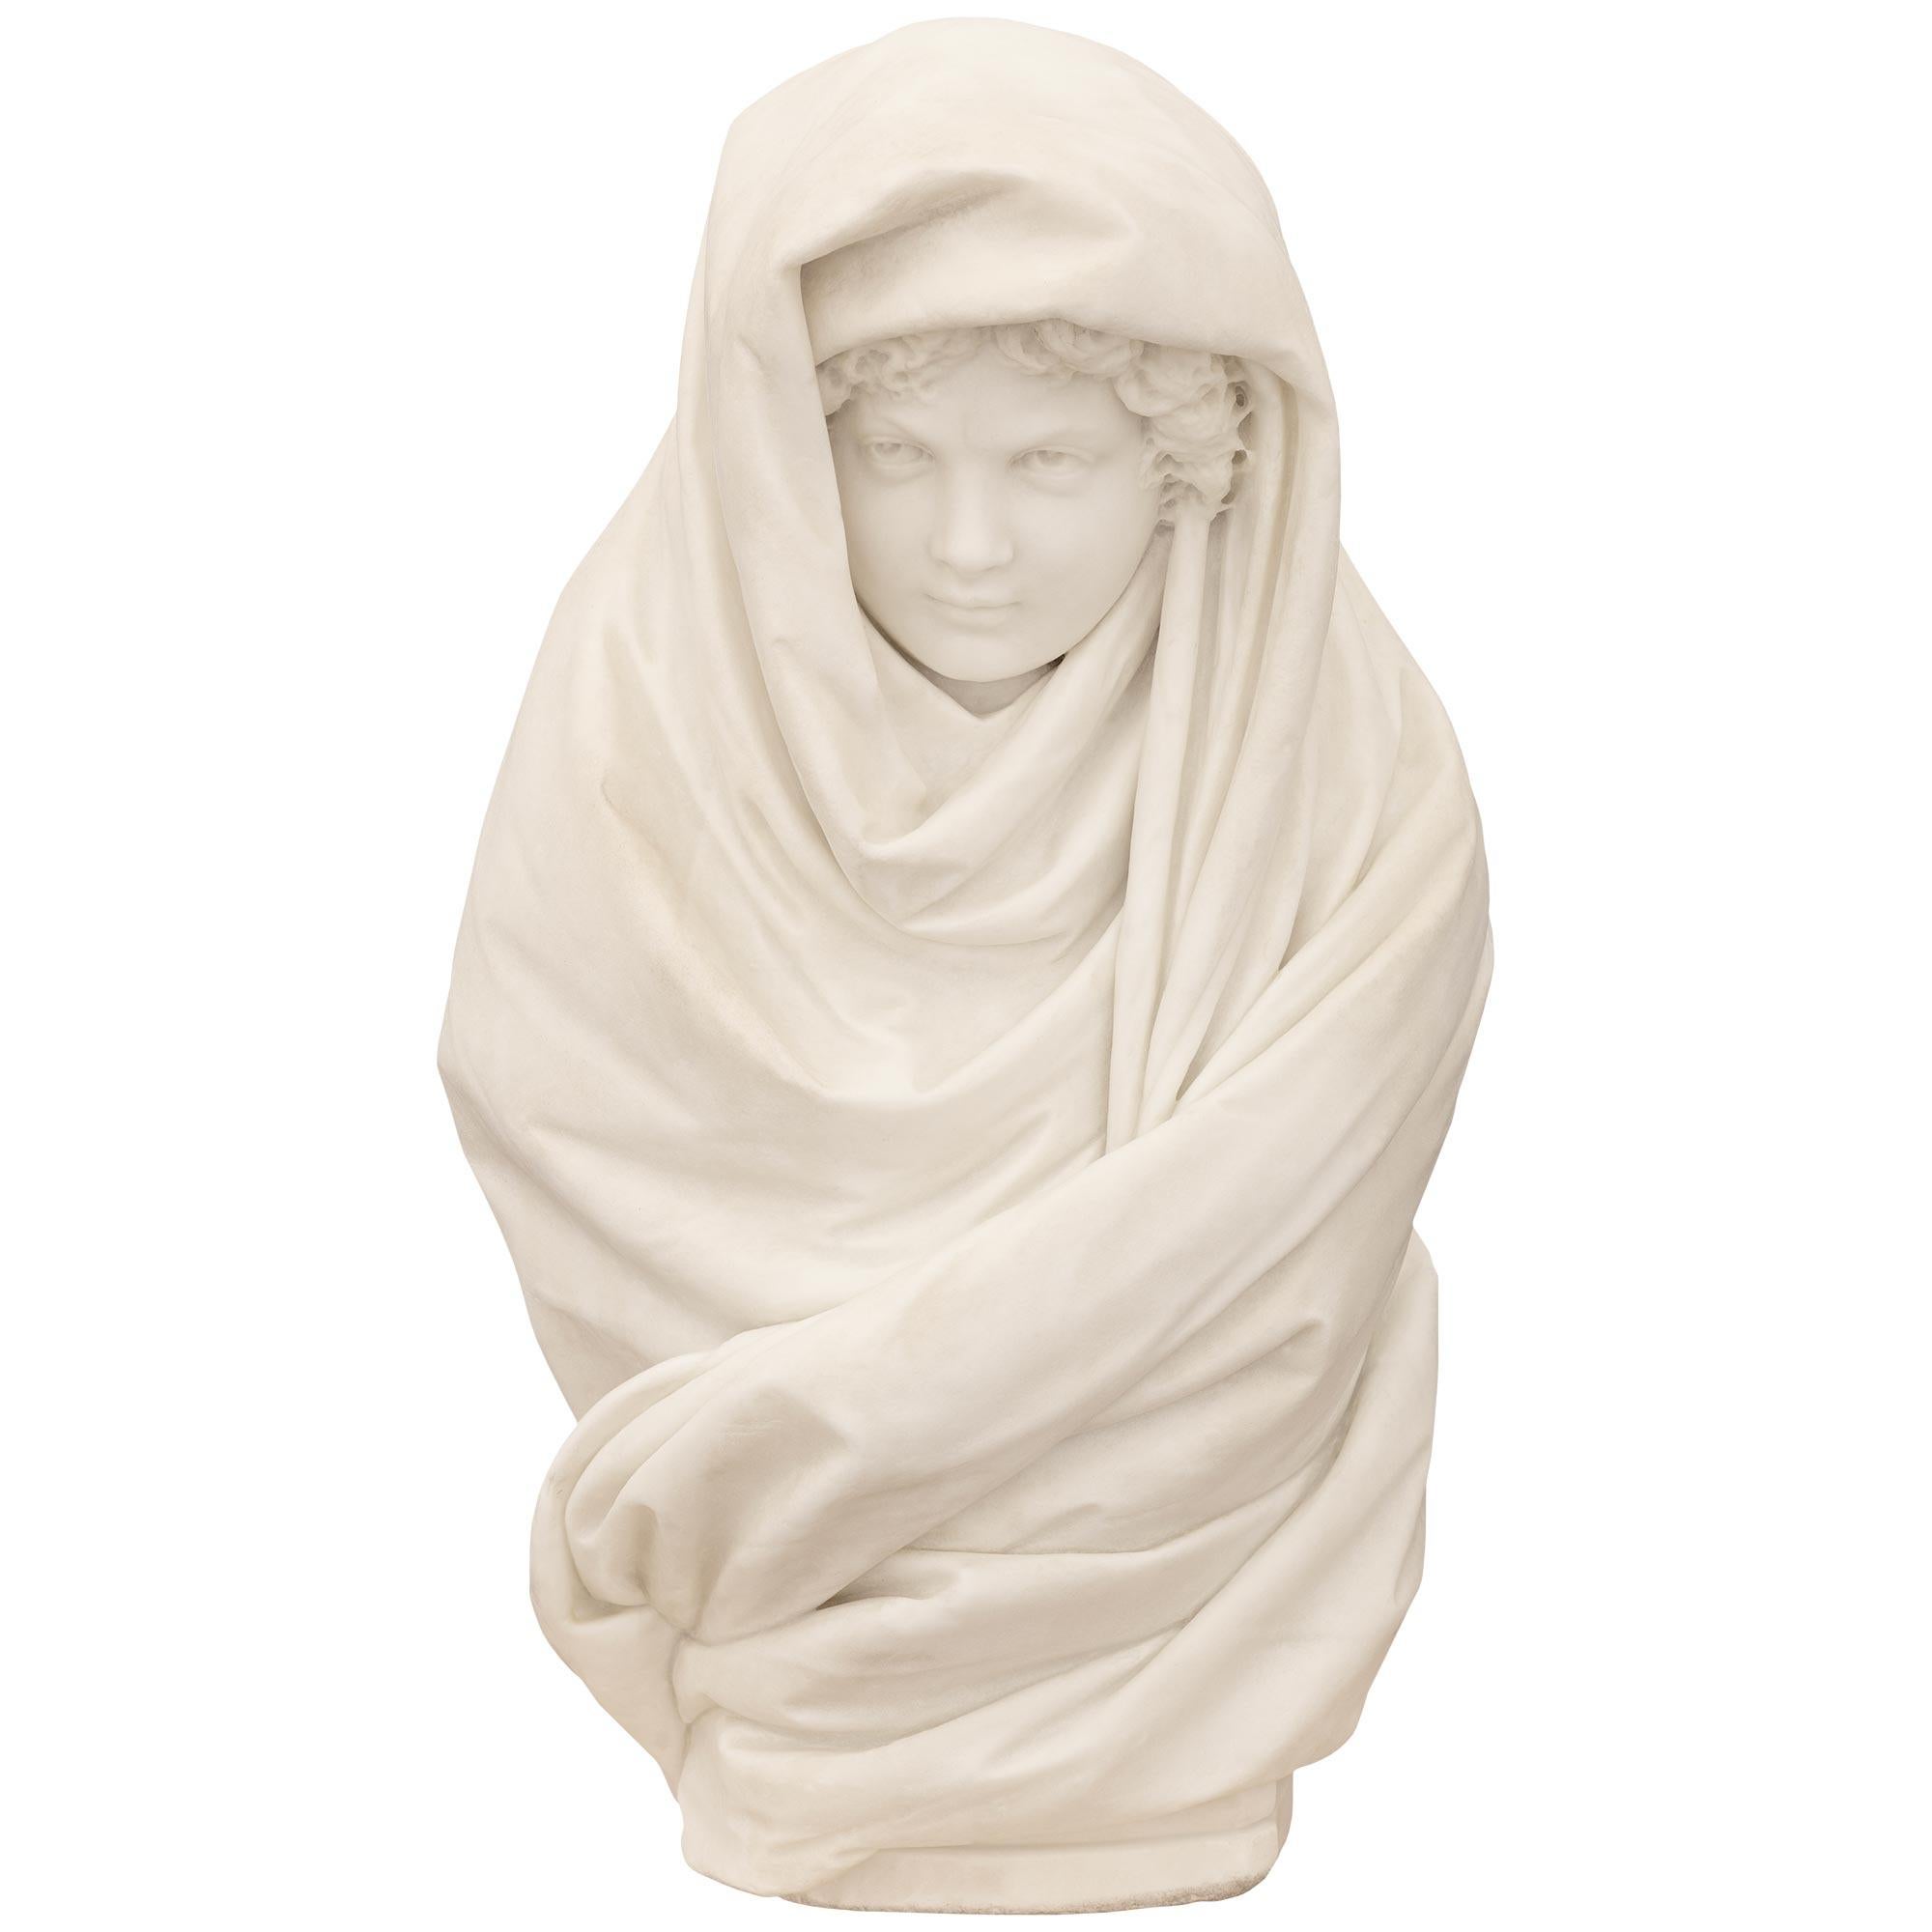 Italian 19th Century White Carrara Marble Sculpture Of A Young Boy In A Shawl For Sale 6